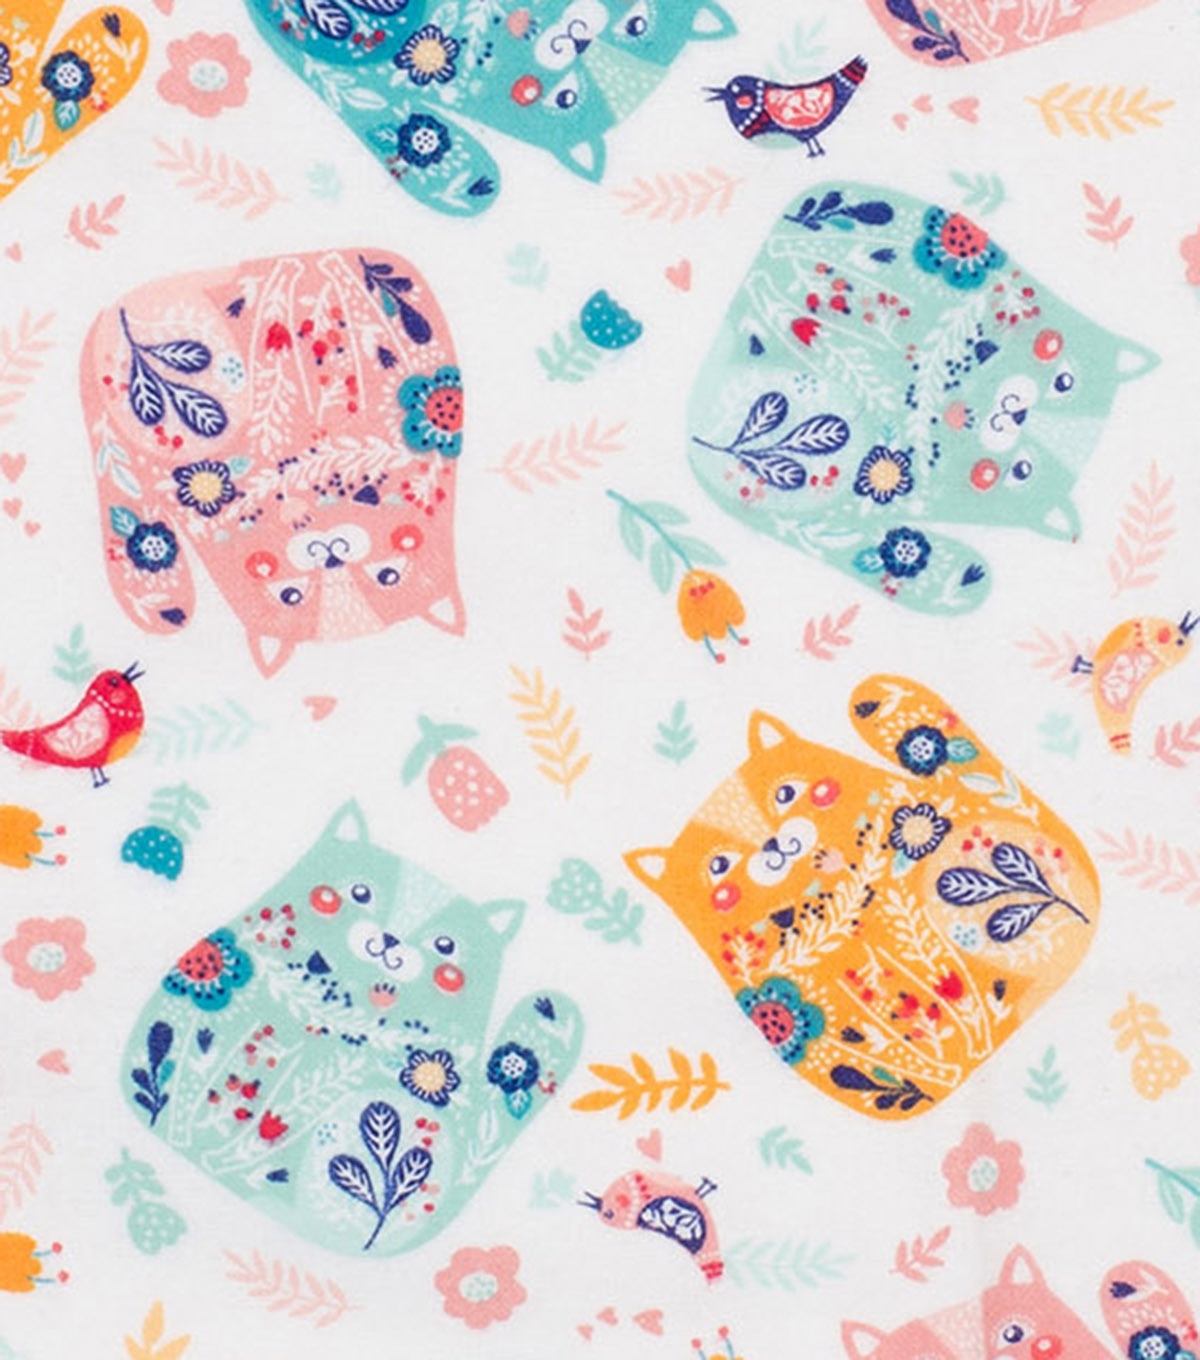 Super Snuggle Flannel Fabric-Floral Cat Tossed | JOANN